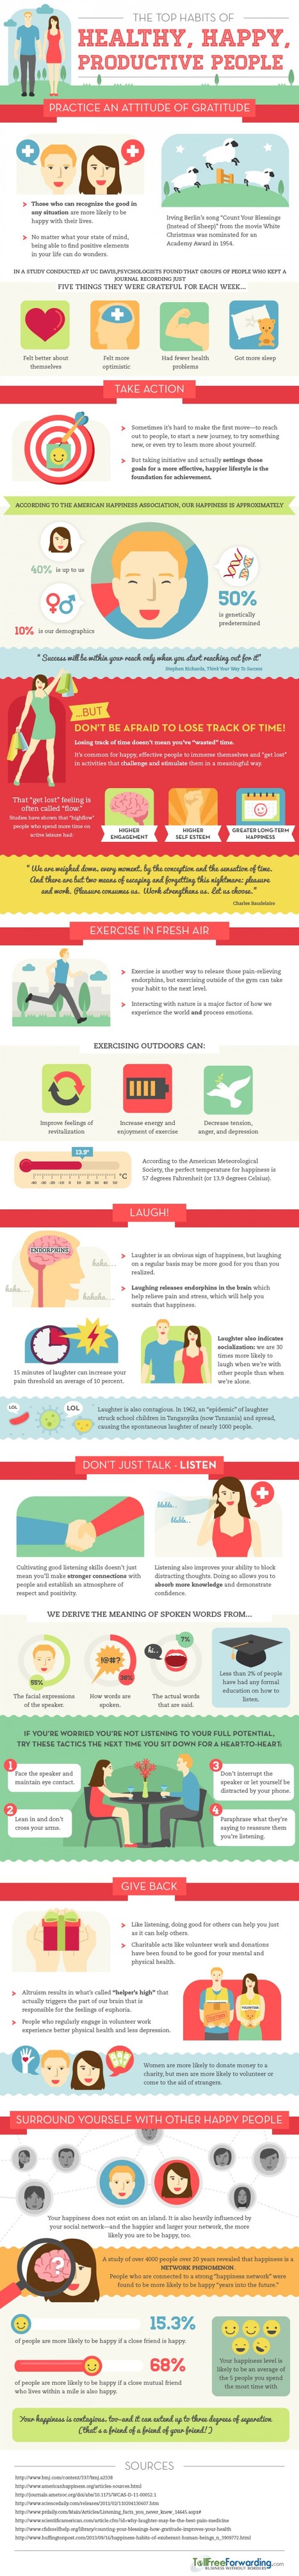 Infographic: The Top Habits Of Healthy, Happy, Productive People | Education 2.0 & 3.0 | Scoop.it